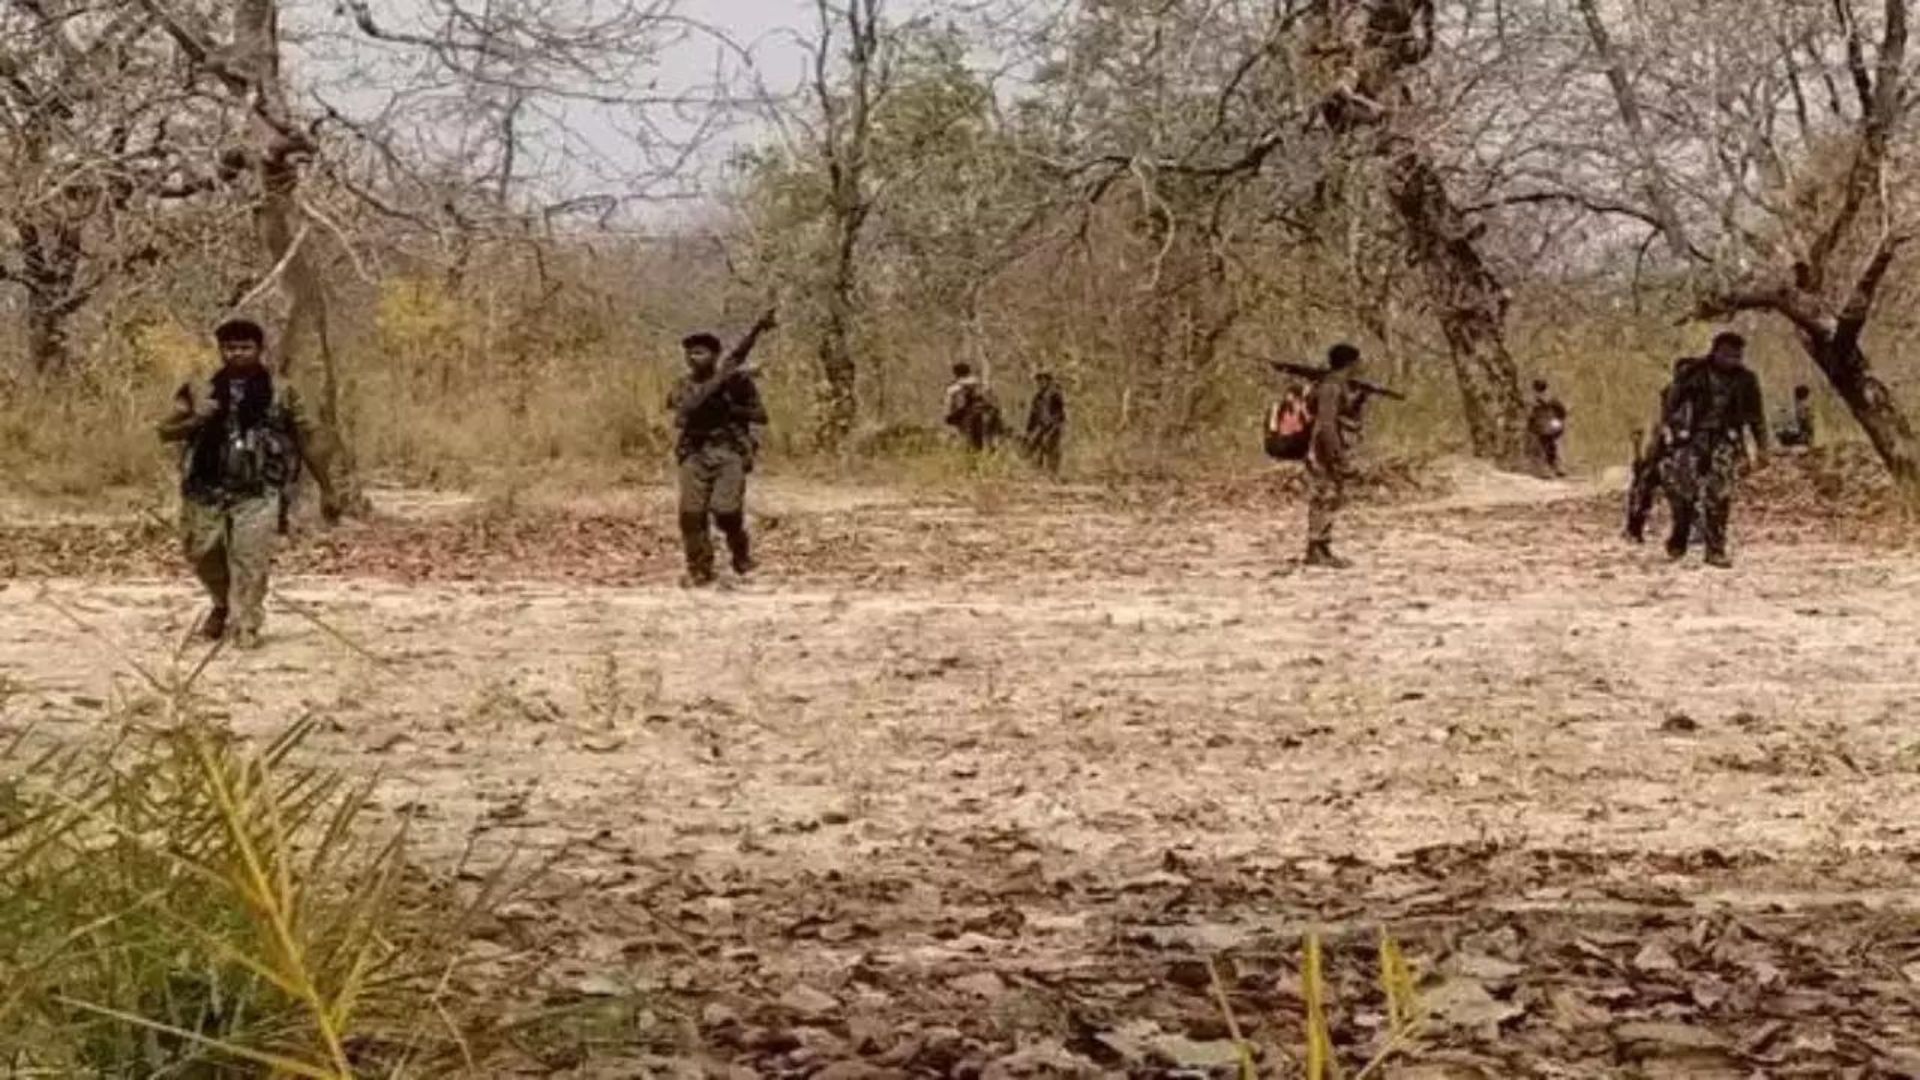 Chhattisgarh: Kanker District Sees An Encounter Between Security Forces And Naxals